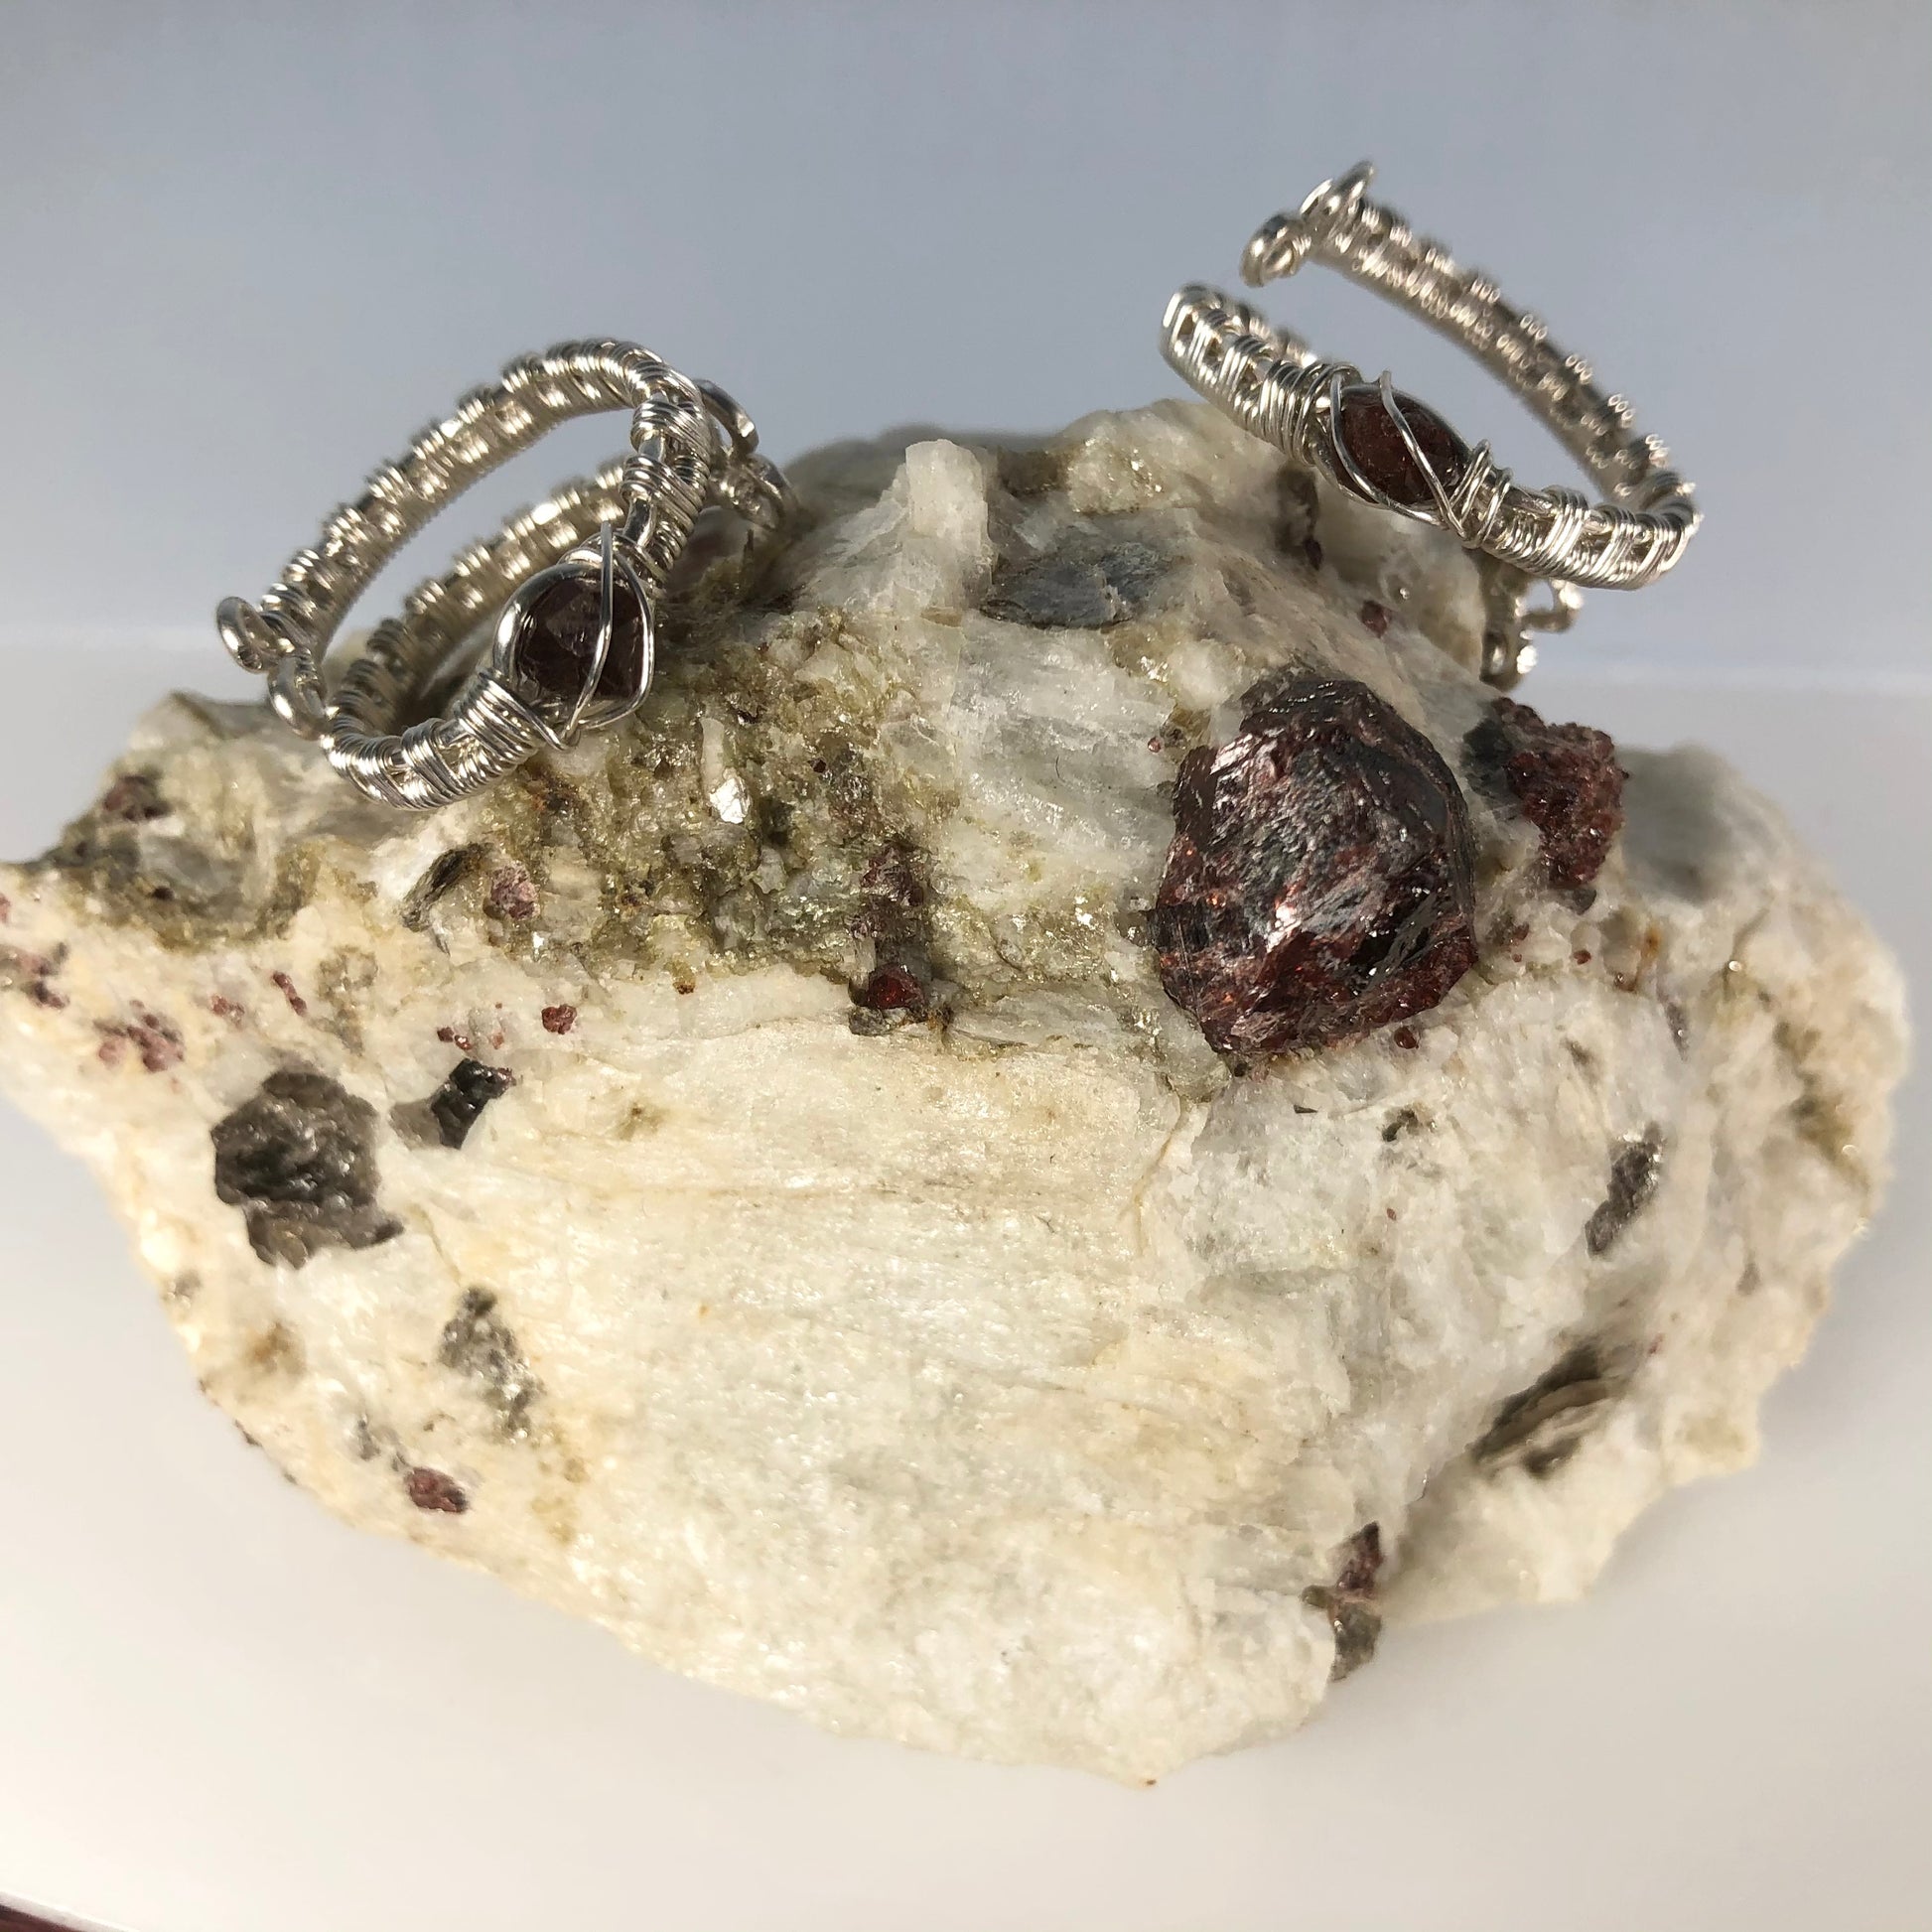 Specimen with Garnets showcasing two Argentium Silver Wrap Garnet Rings (1 ring per order. Specimen is not included)